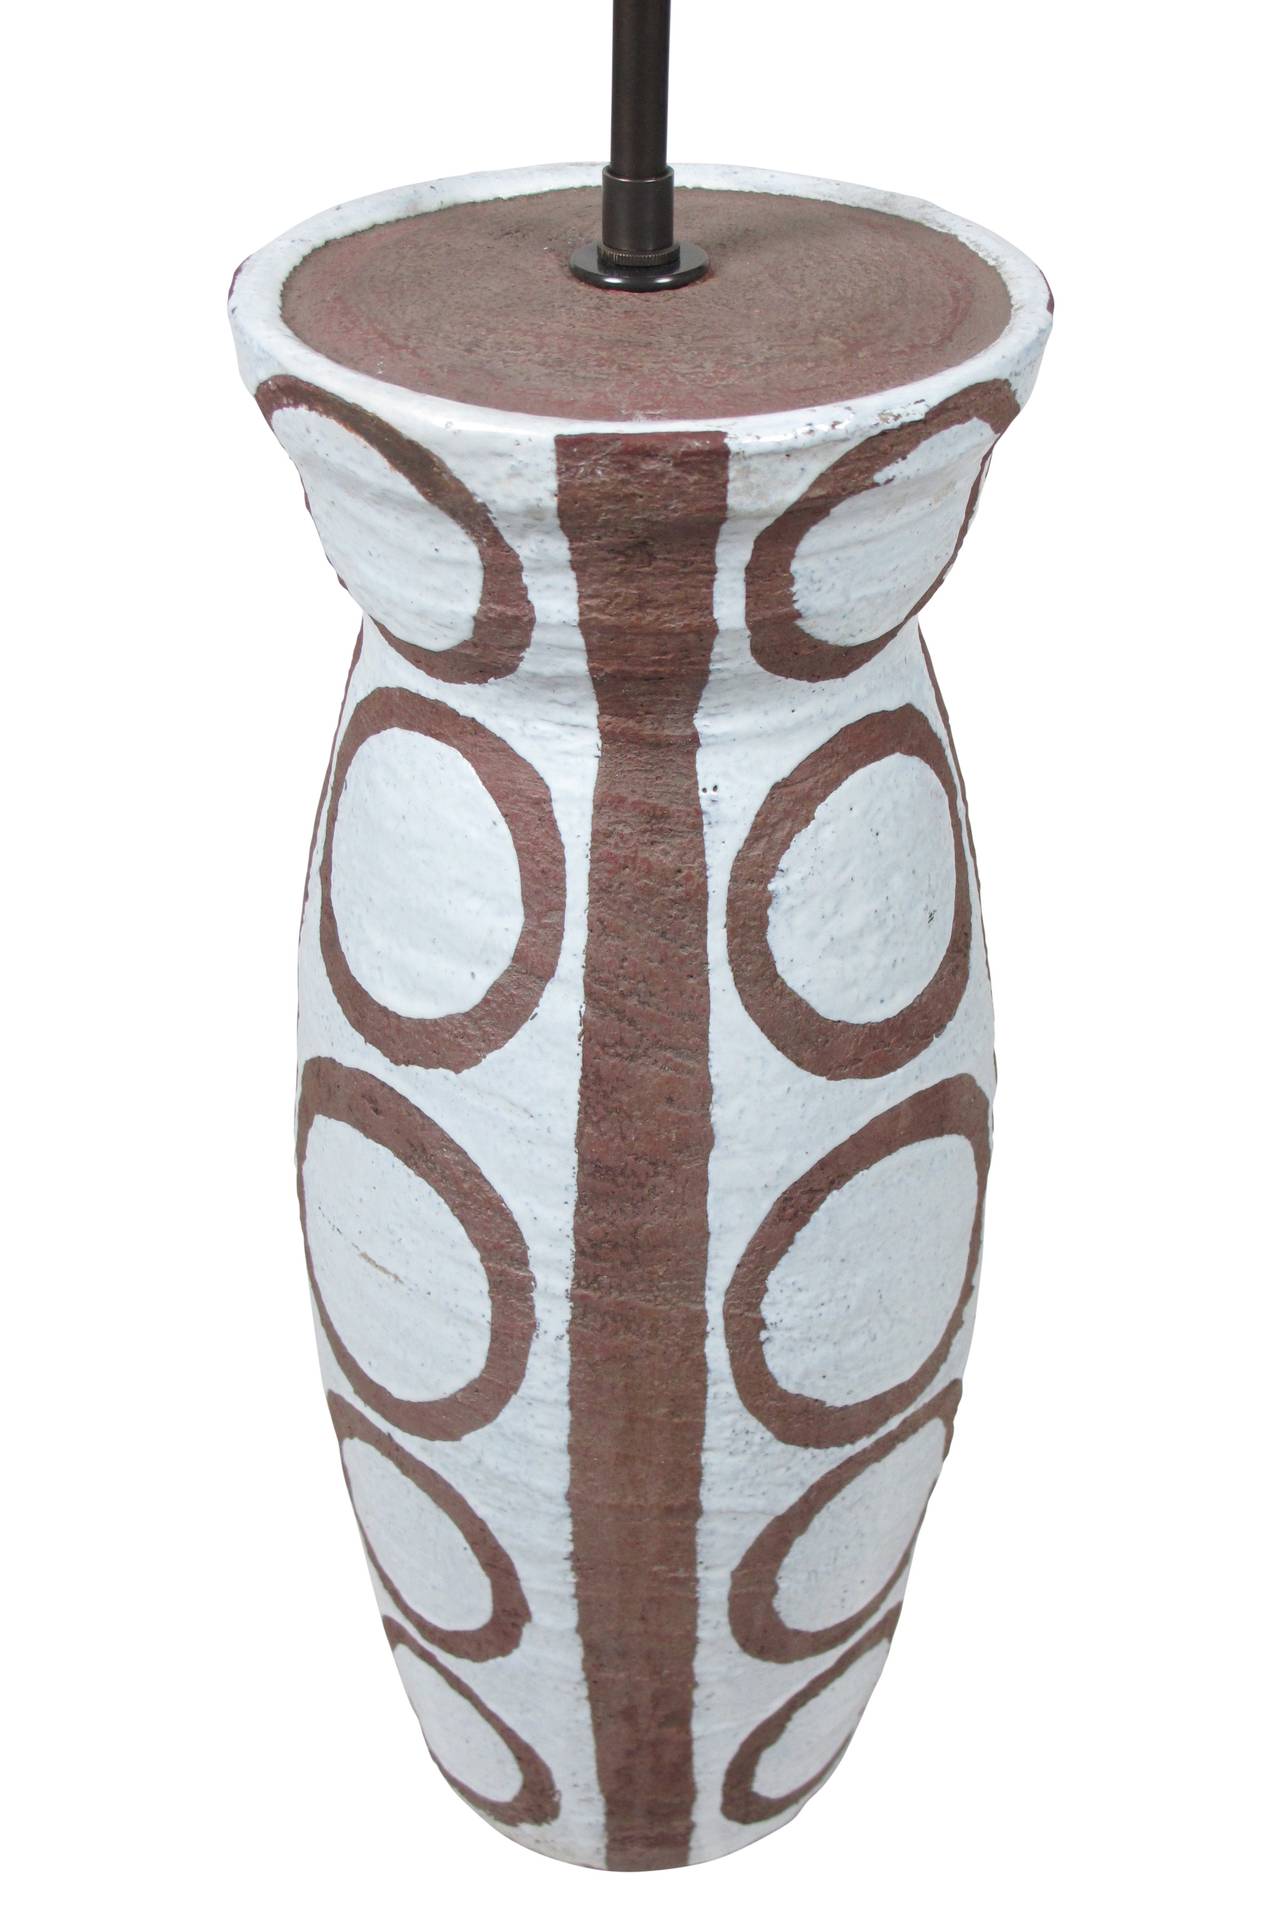 Tall Primitive Patterned Italian Ceramic Table Lamp by Zaccagnini 2